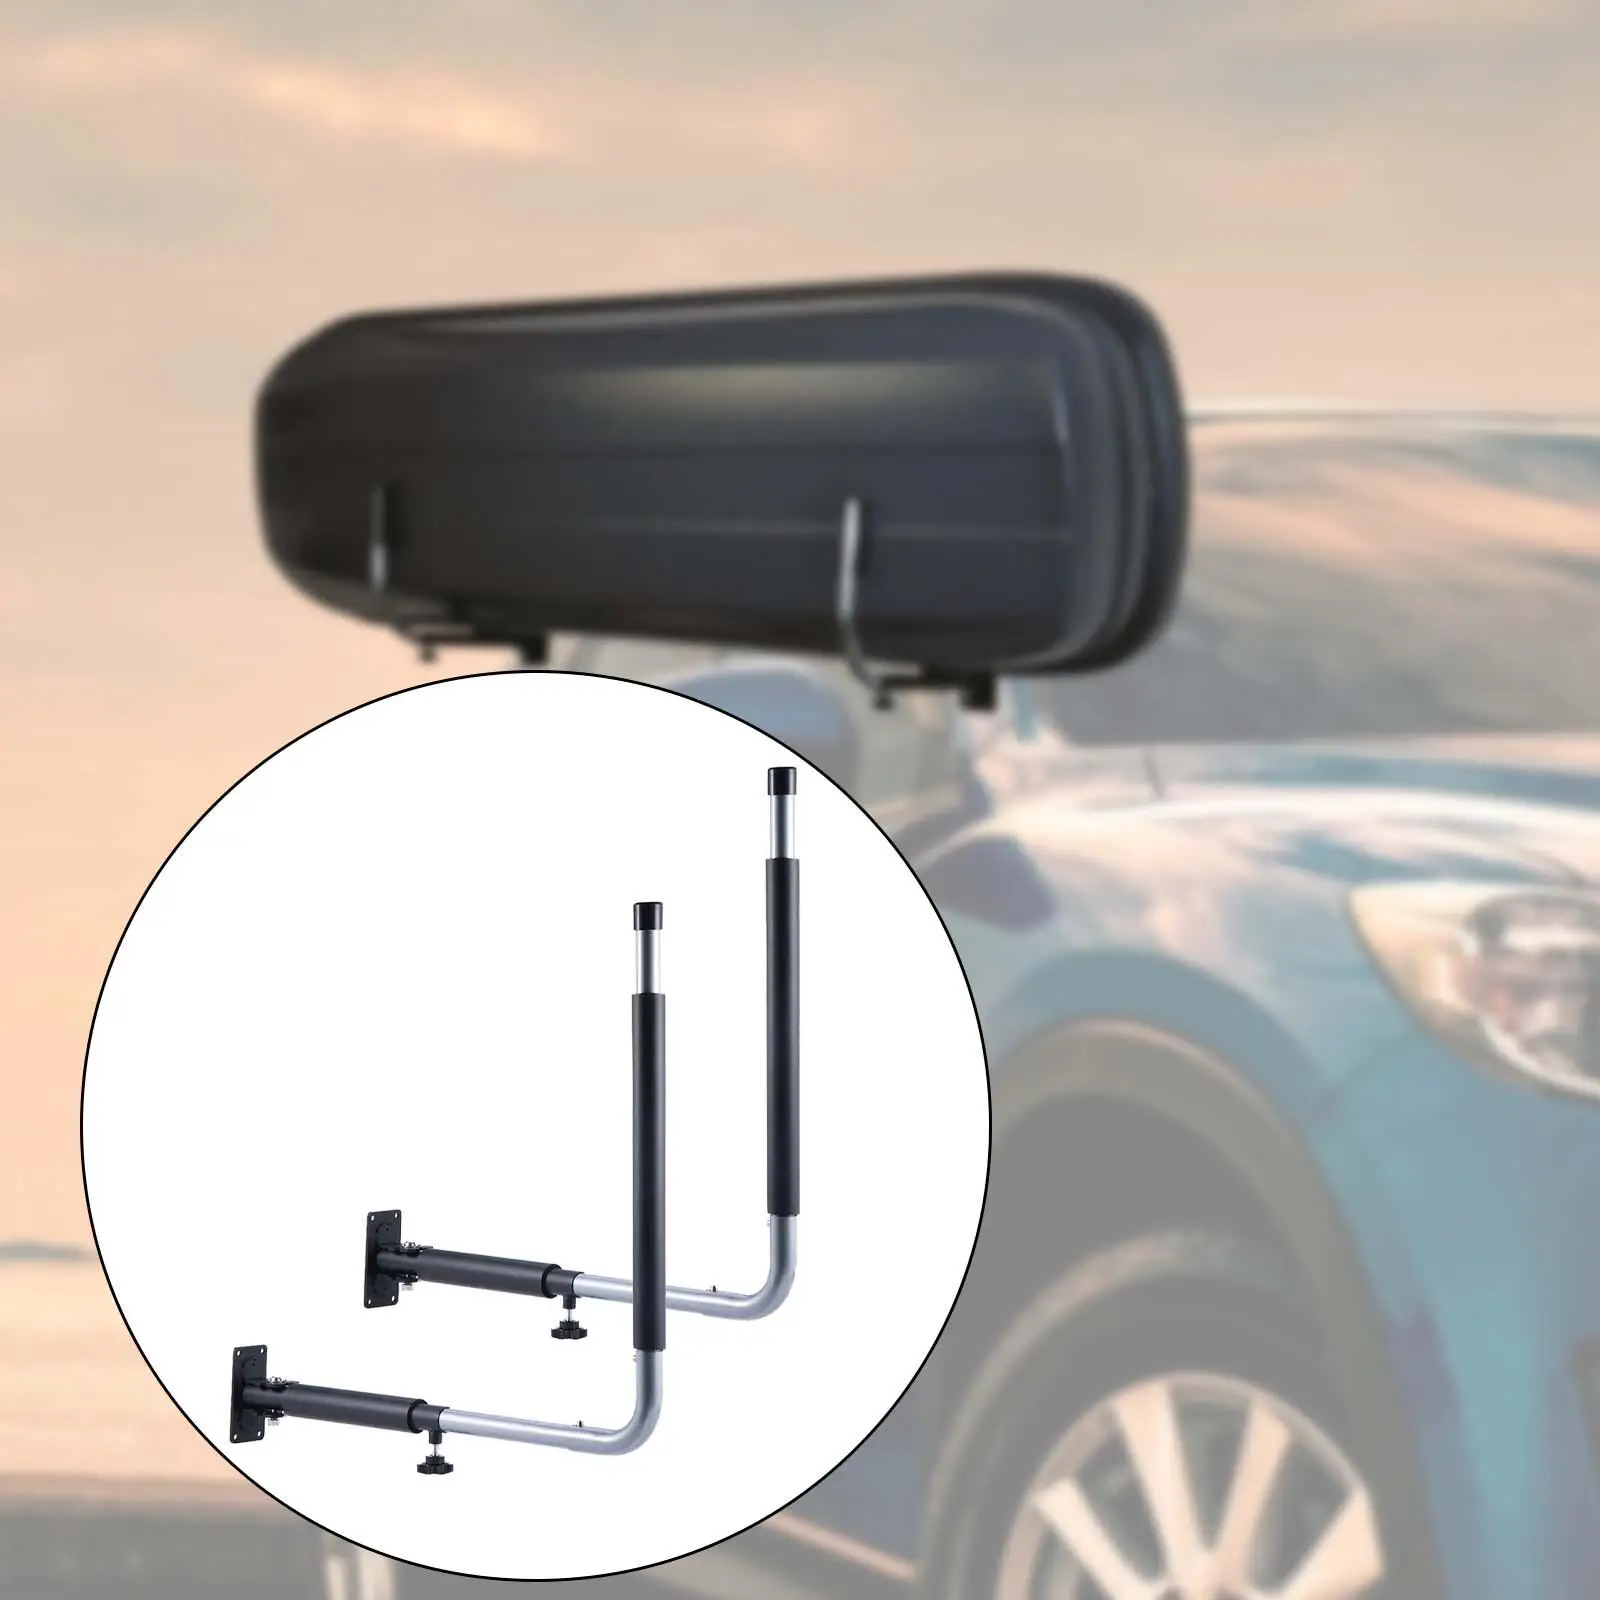 Foldable Kayak Storage Hook Car Roof Box Wall Mount Rack for Canoe Surfing Board